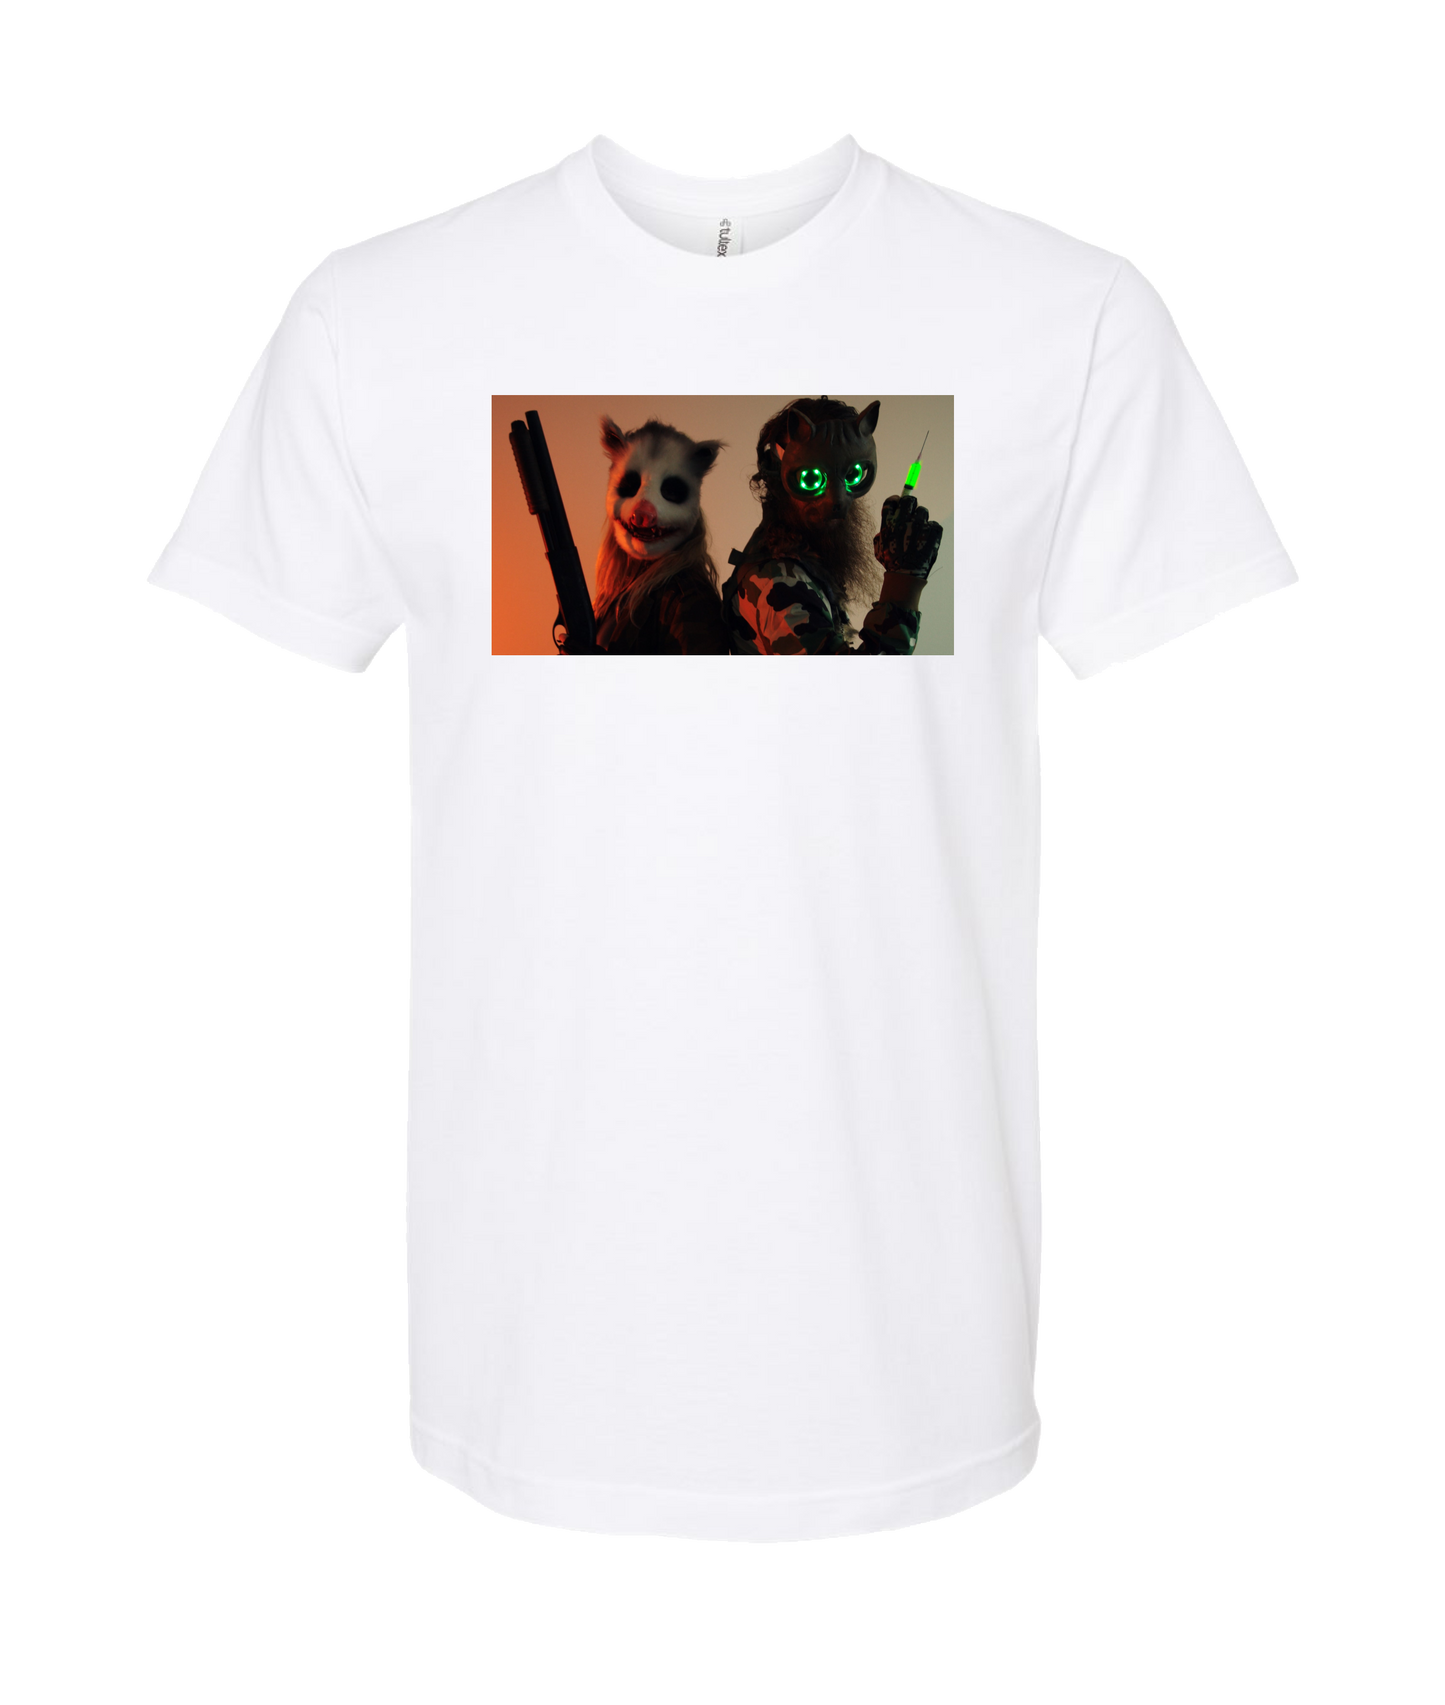 Refinery Films - GRINNERS GARB 01-1 - White T-Shirt